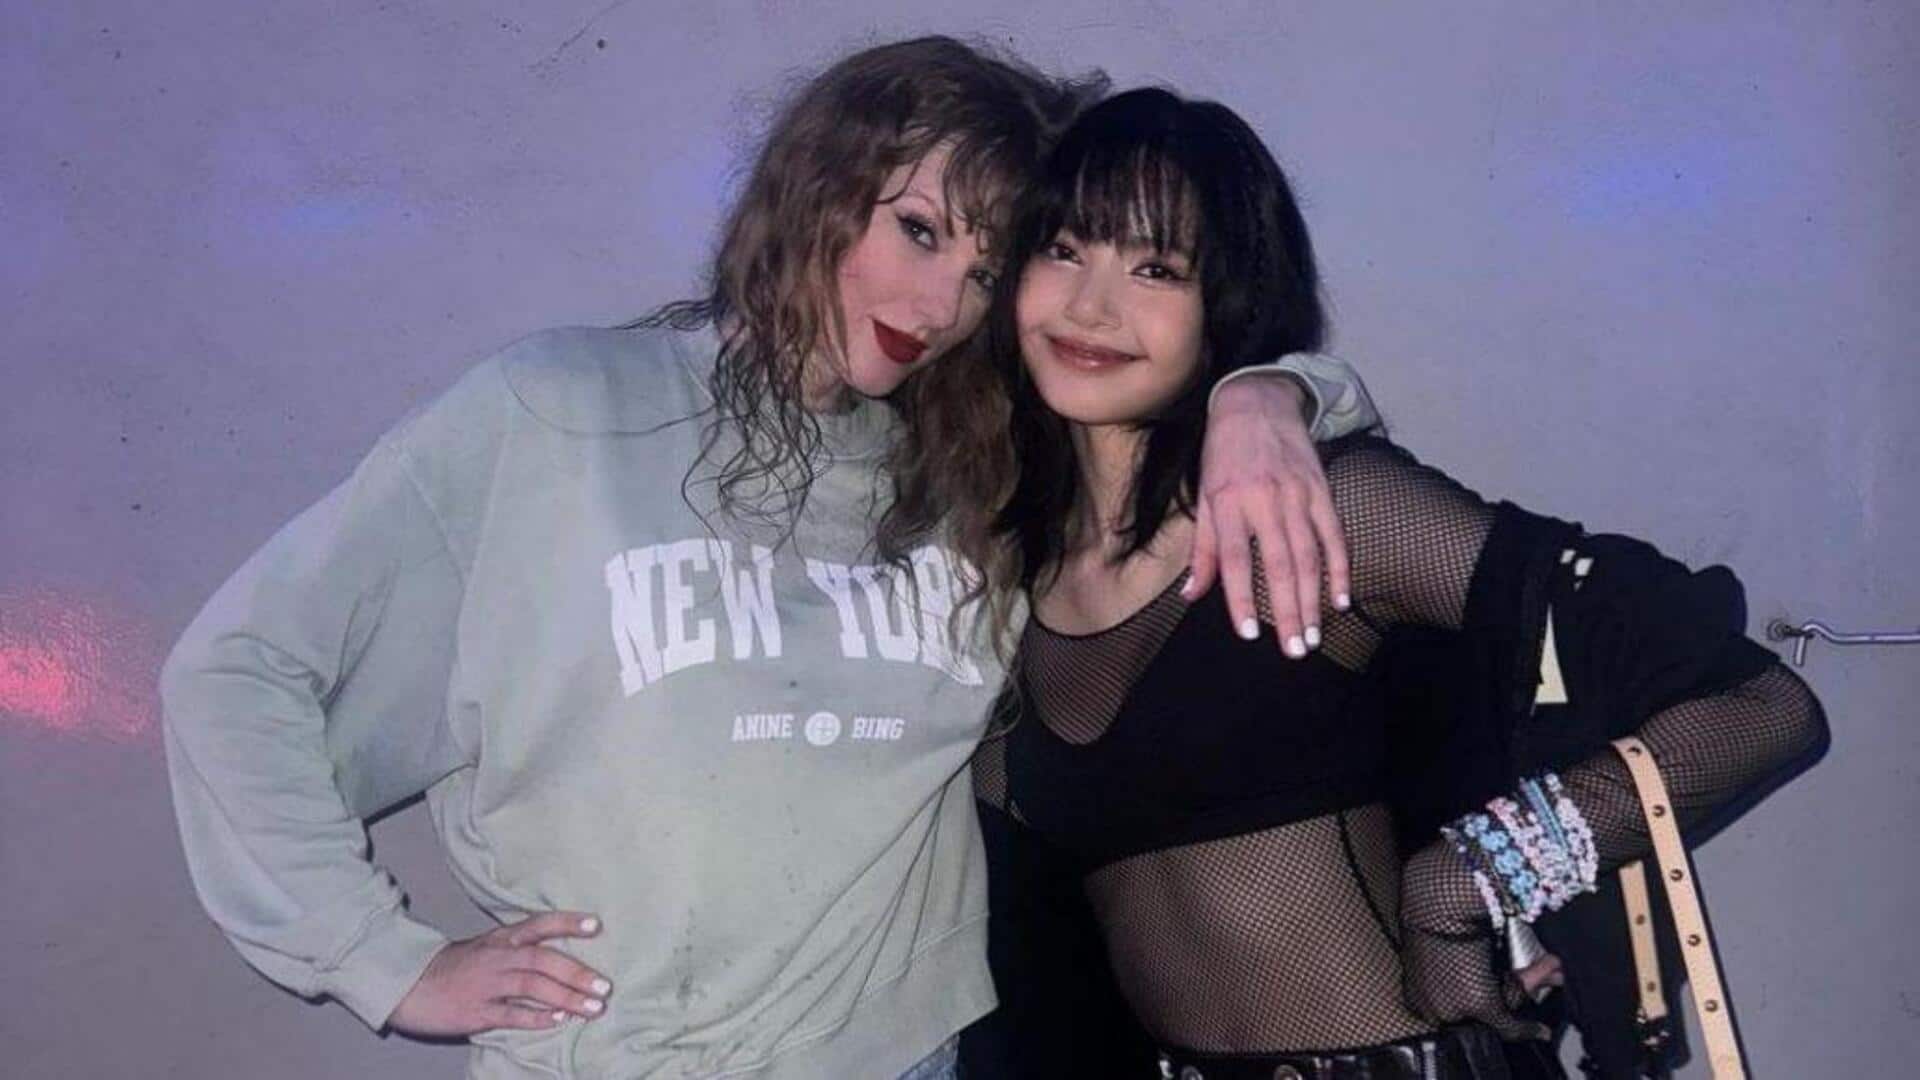 'Eras Tour': BLACKPINK's Lisa poses with Taylor Swift 